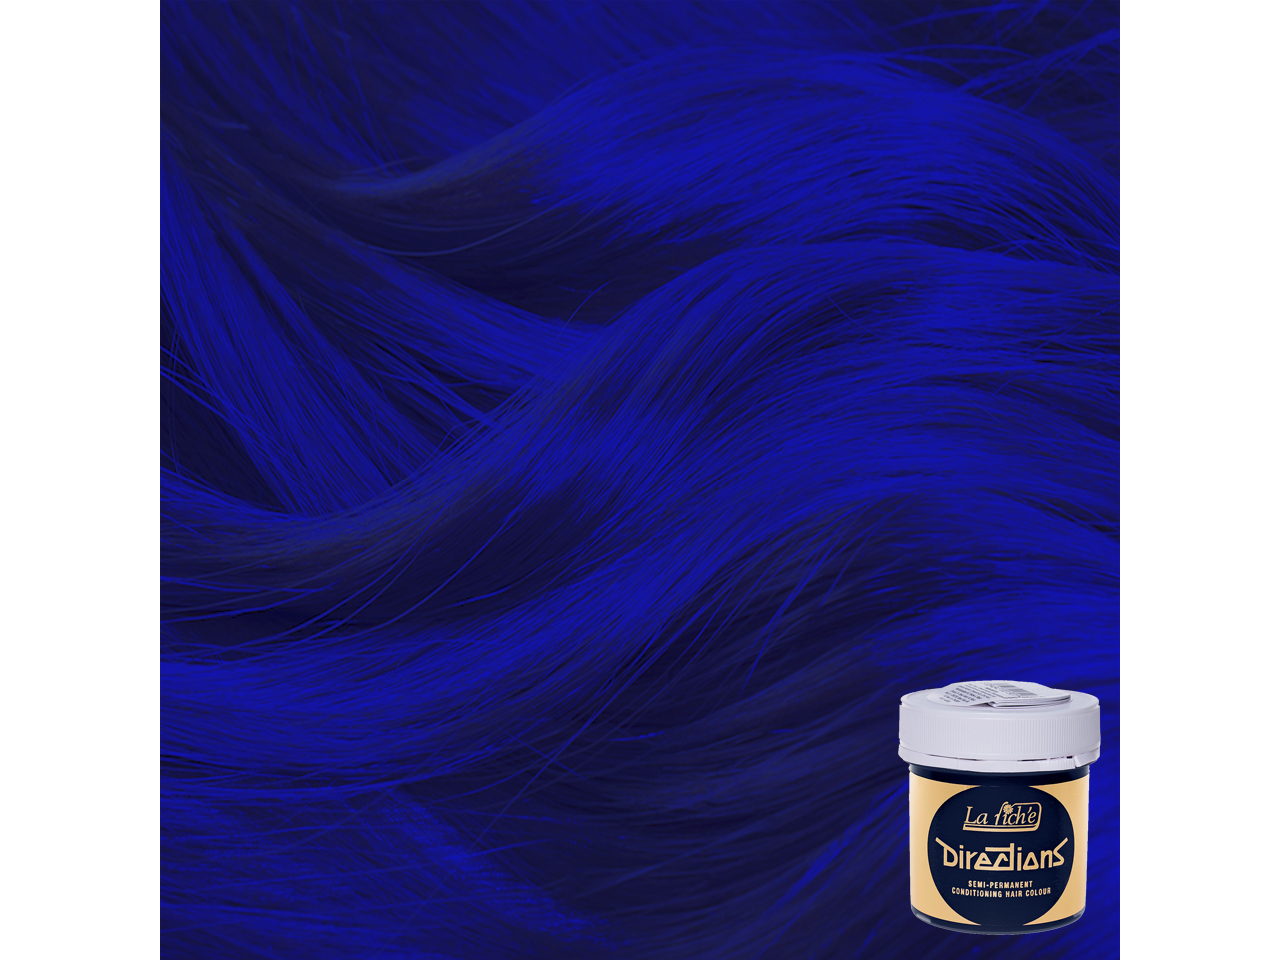 2. "How to Dye Your Hair Midnight Blue: A Step-by-Step Guide" - wide 4